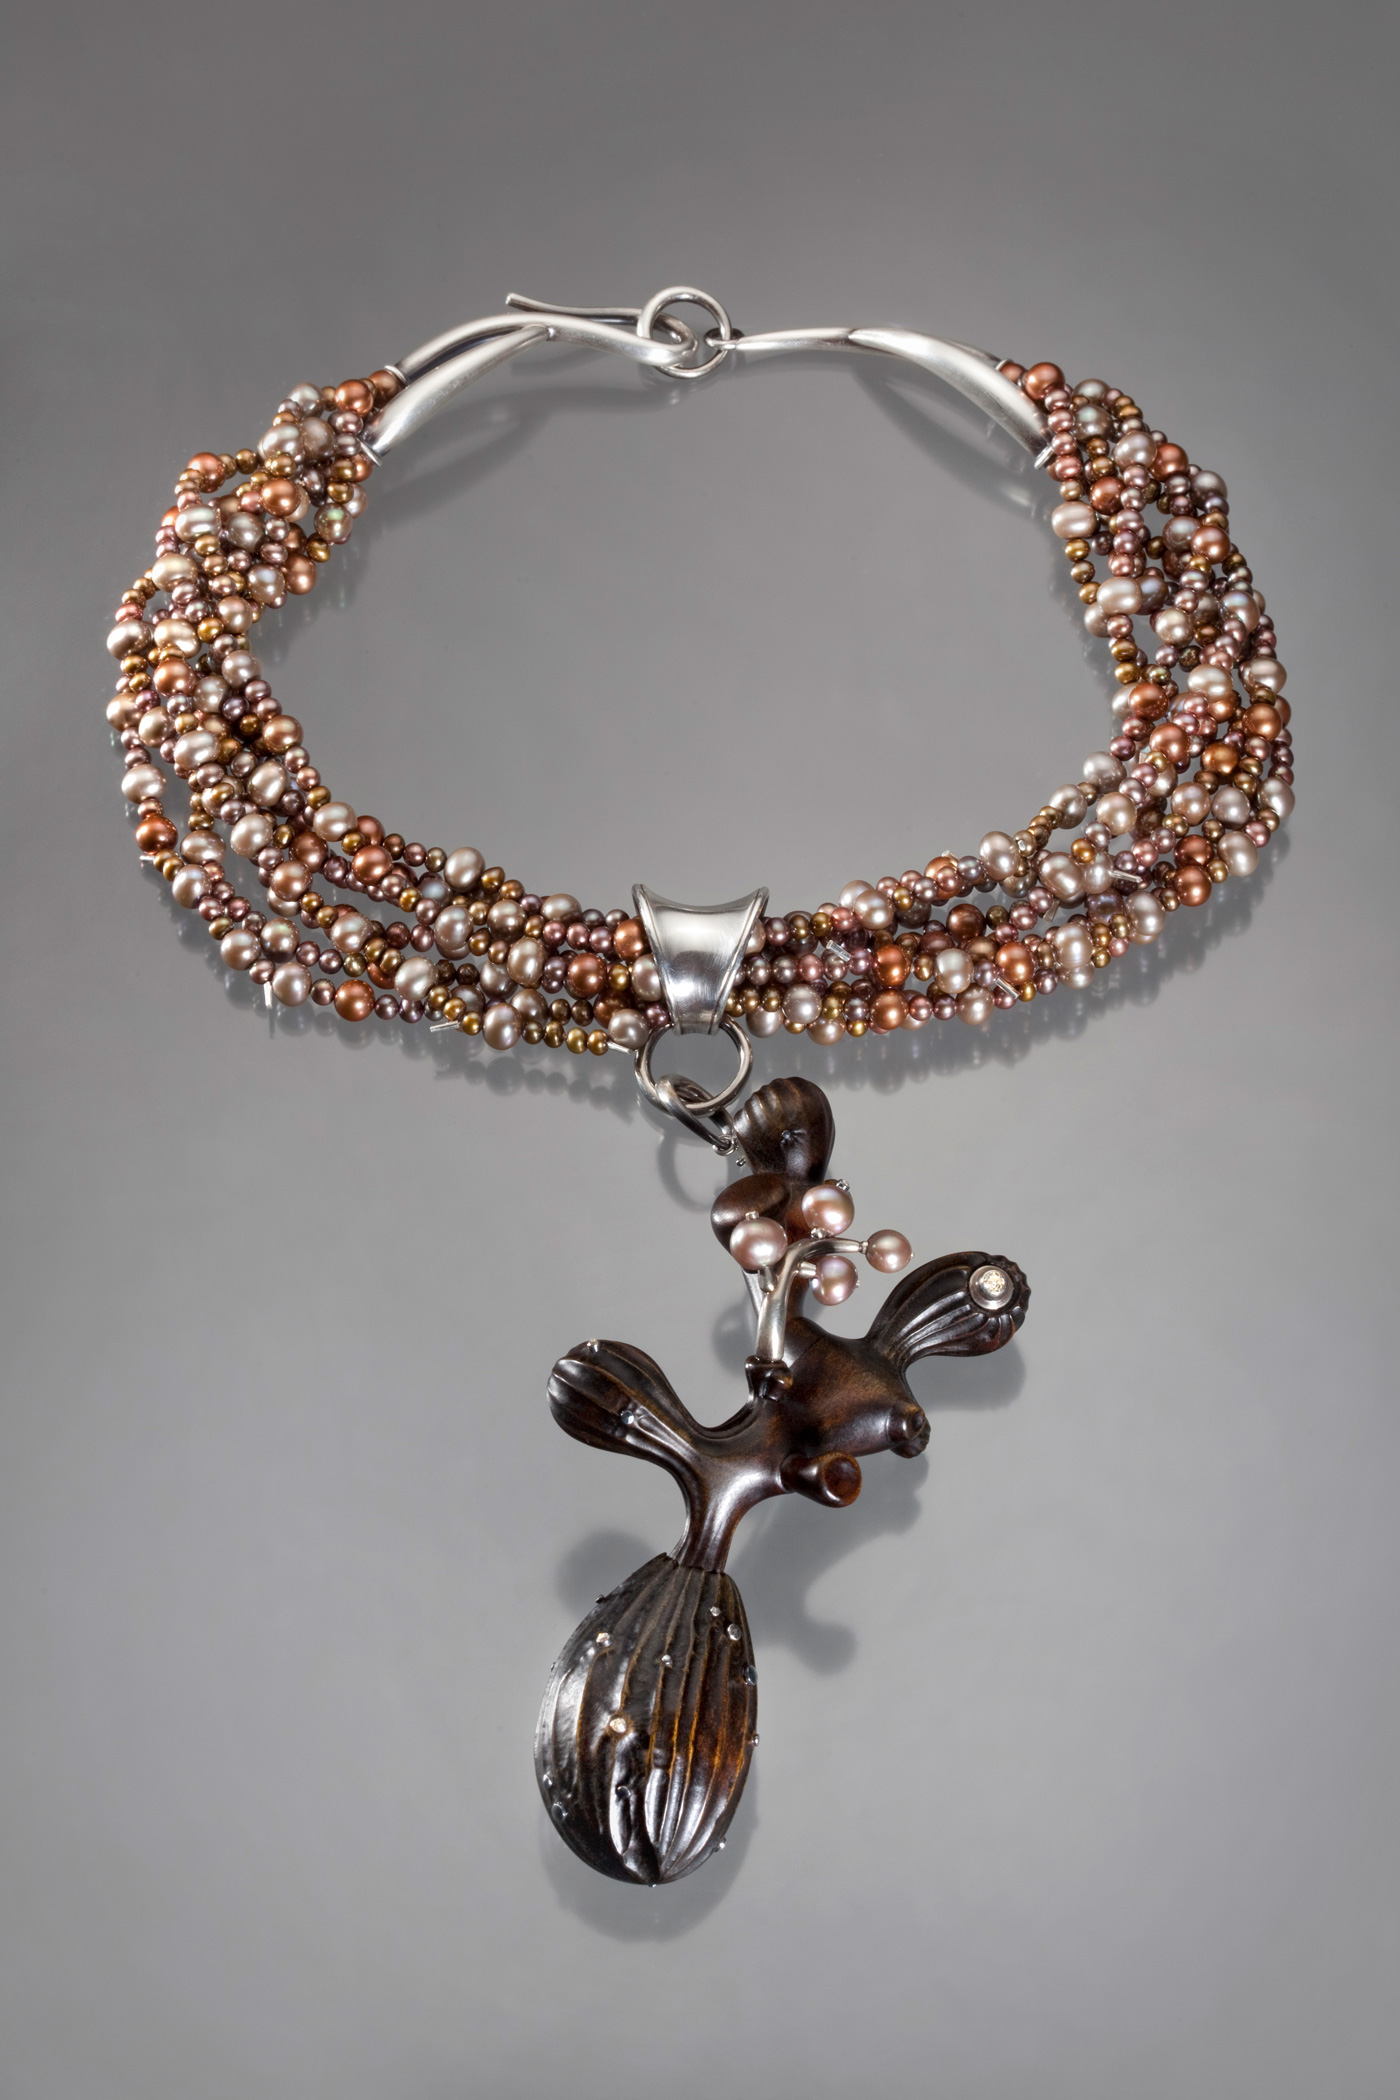 Handcrafted art jewelry by Sharon Church